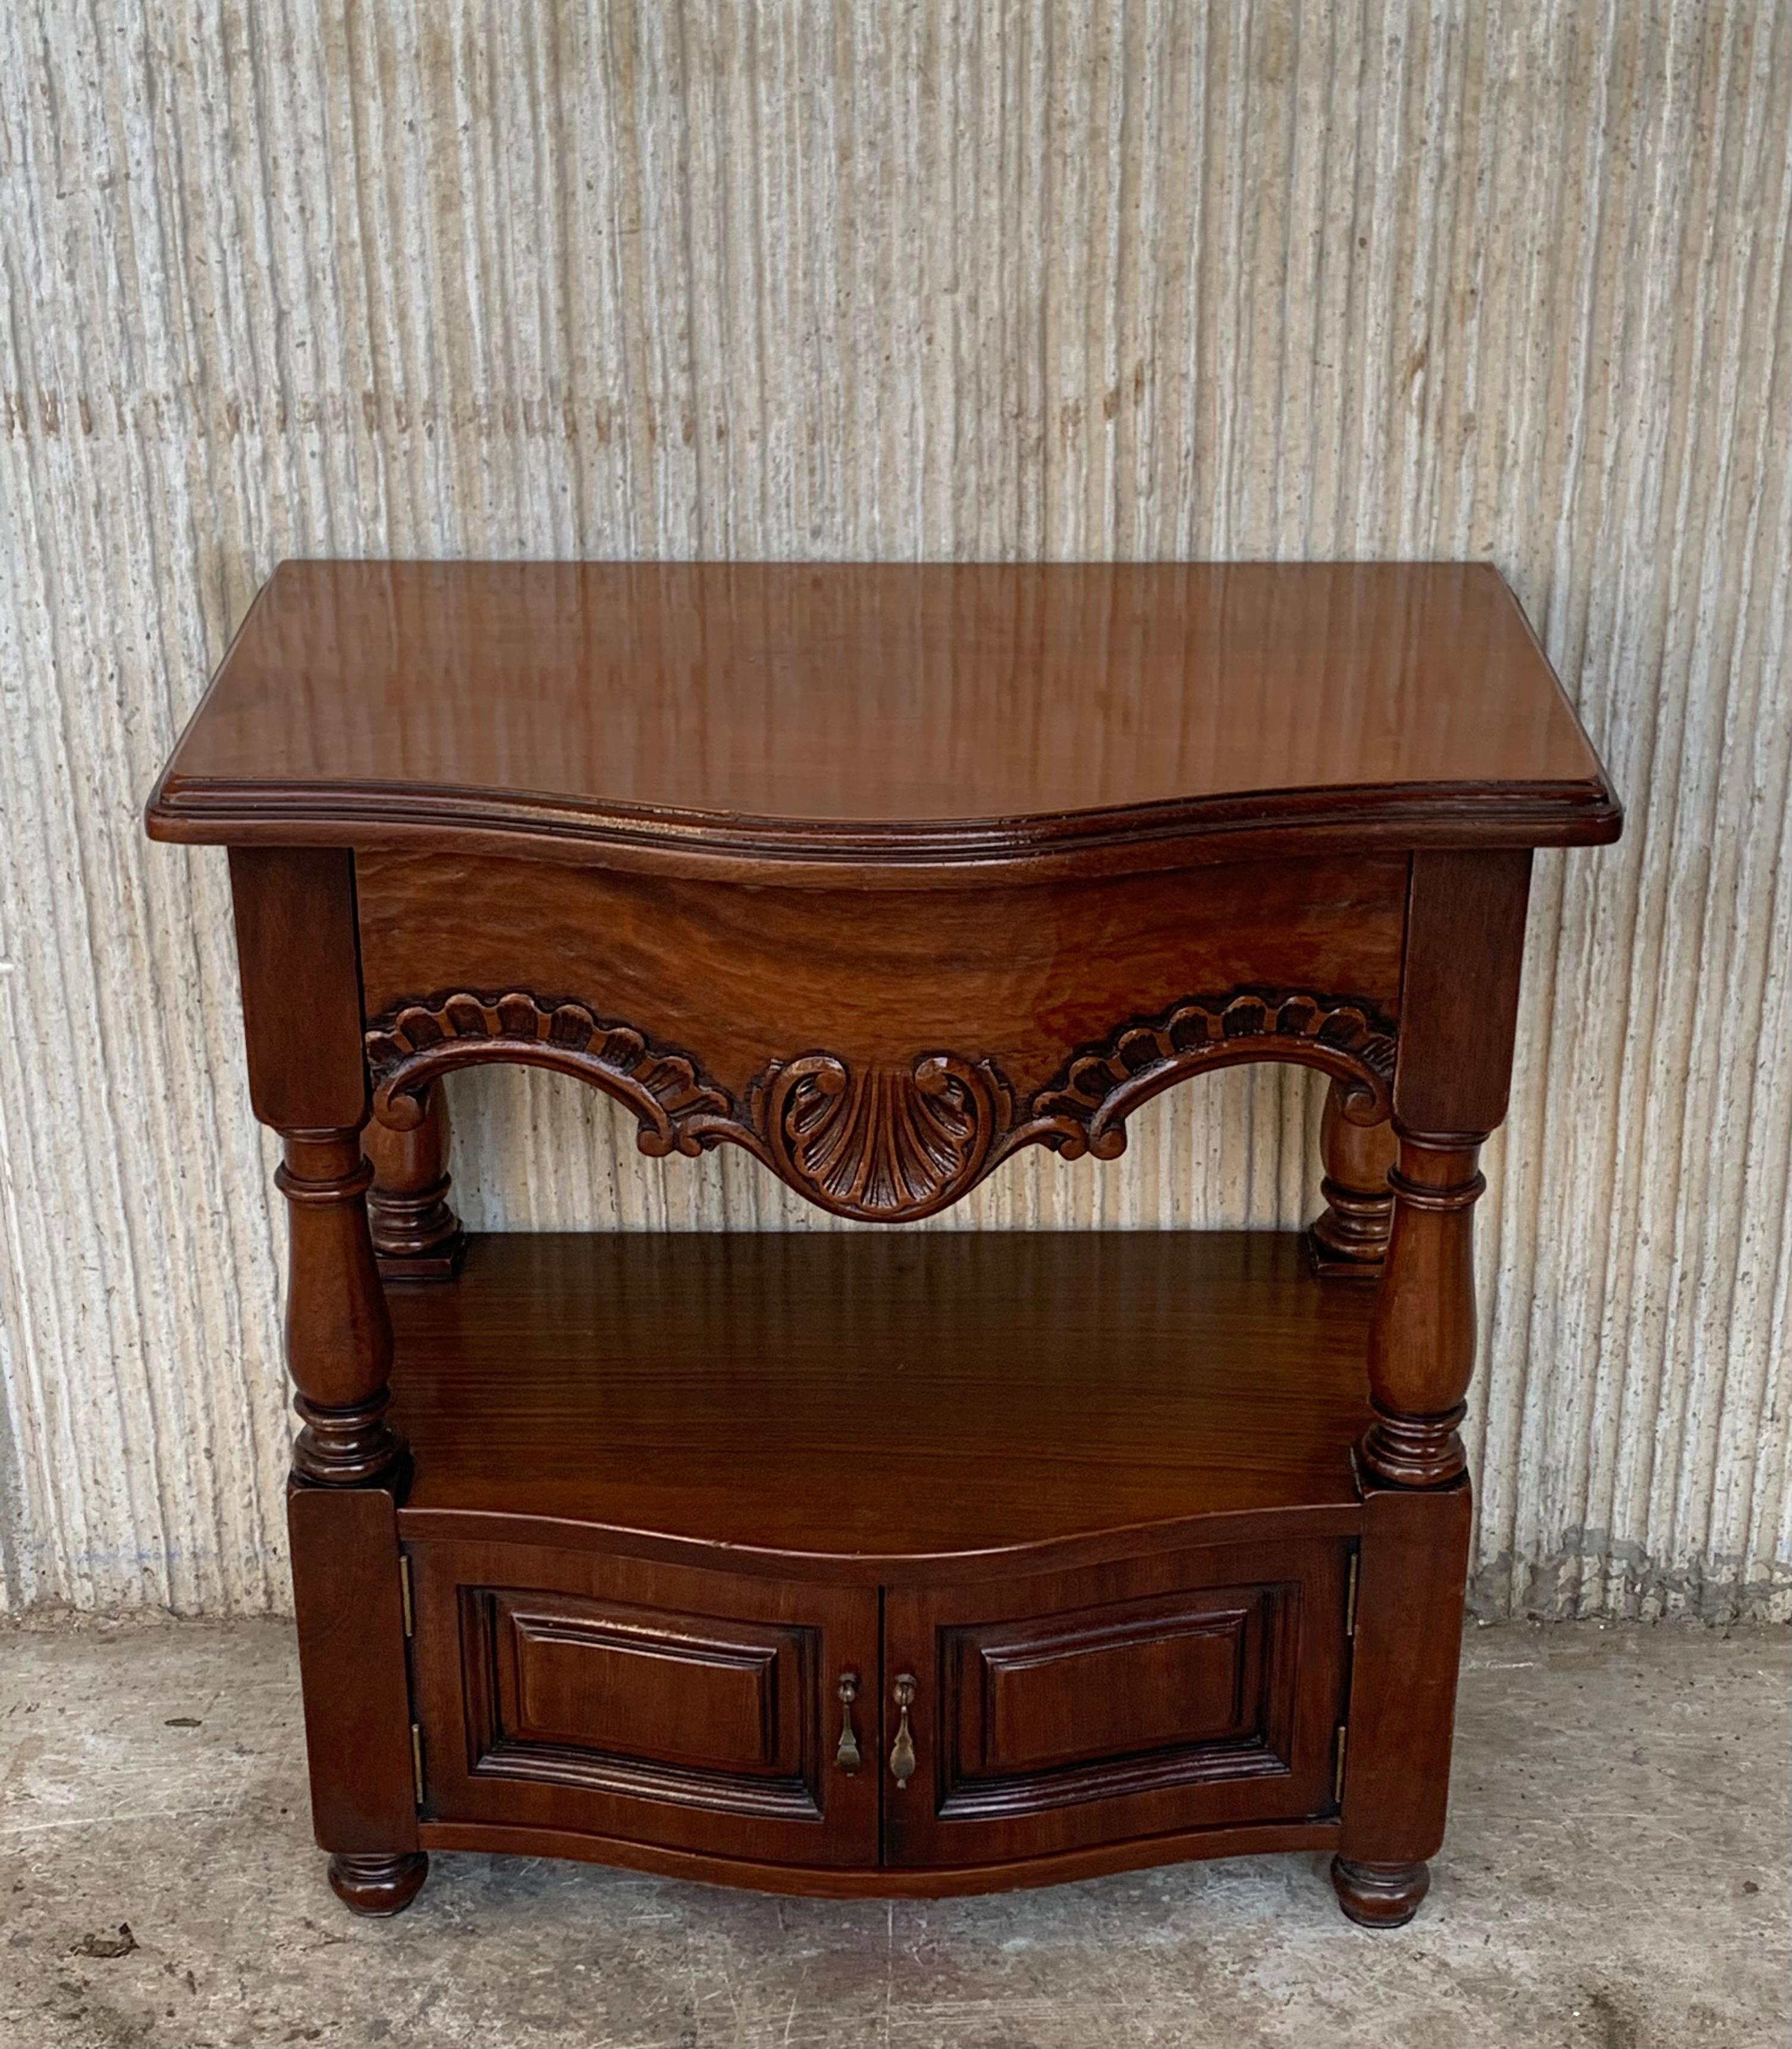 19th century pair of Catalan - Spanish nightstands with carved drawers and open shelf
Beautiful solomonic colums of this period
Two small doors in the low space for an extra storage
Beautiful and heavy nightstands with carved drawer.

Measure: